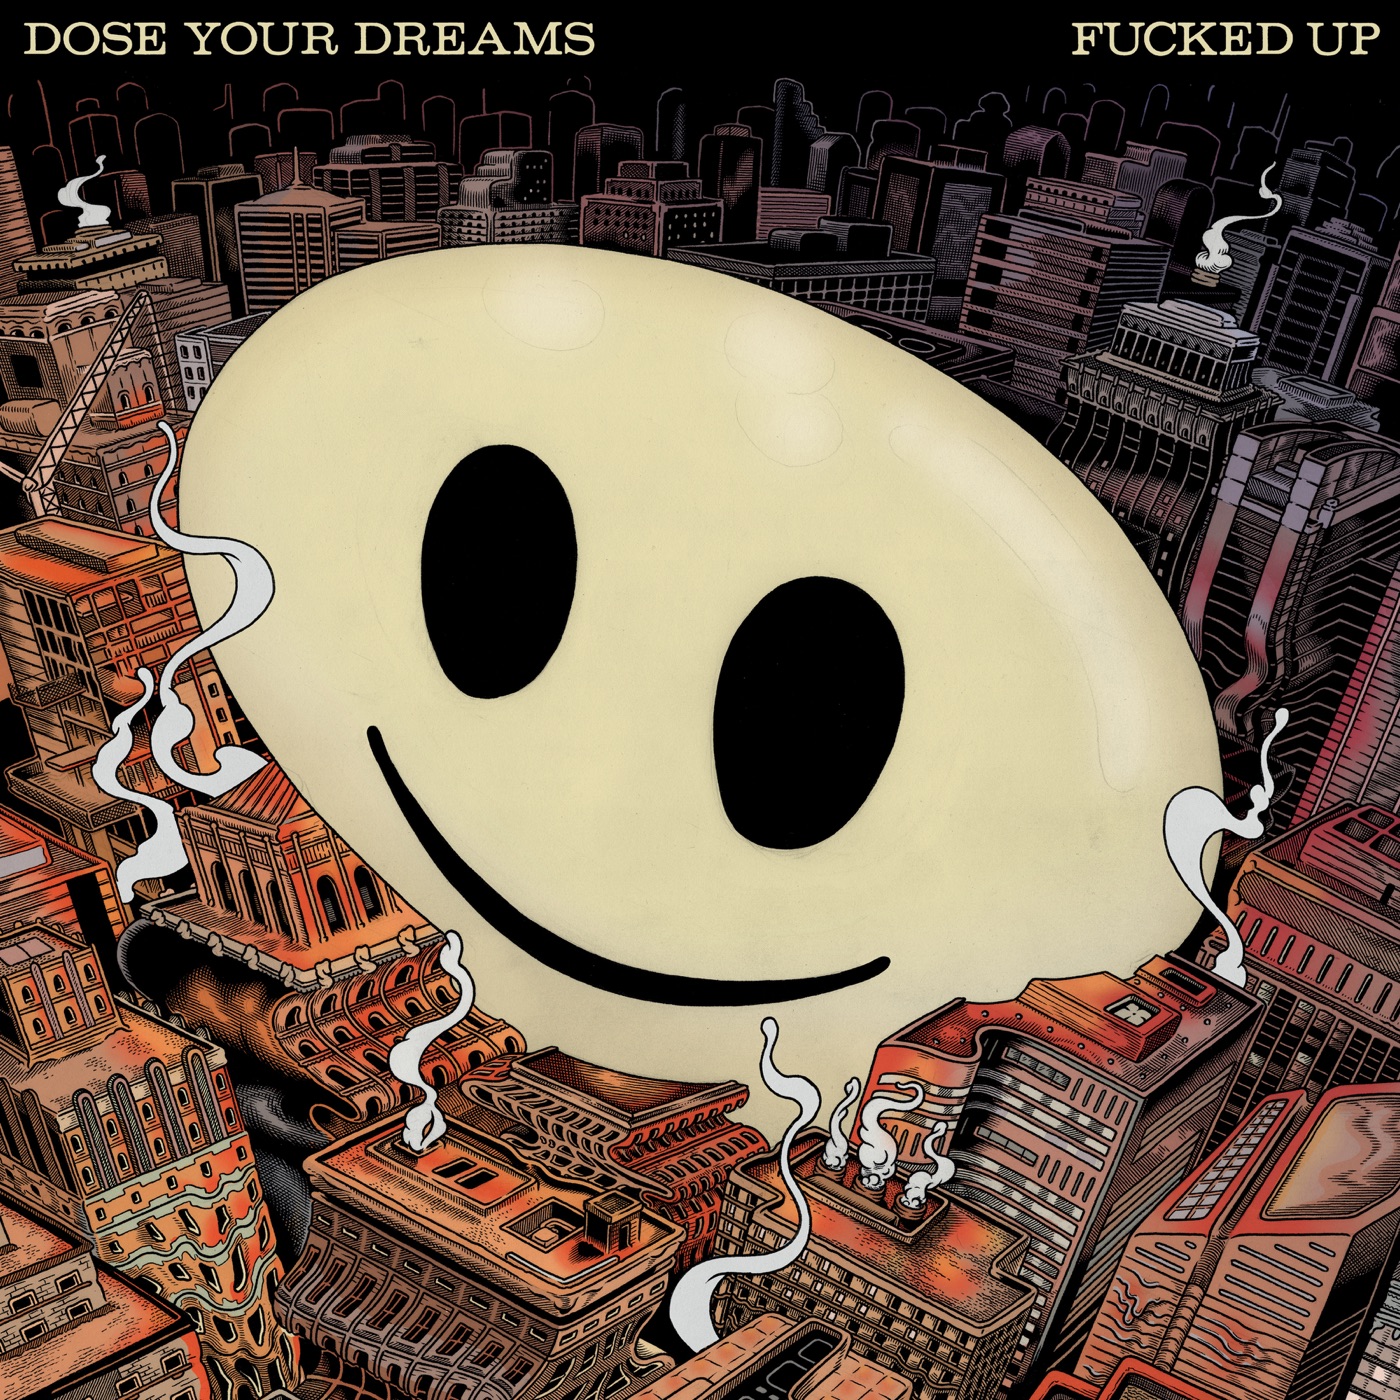 Fucked Up - Dose Your Dreams (2018)